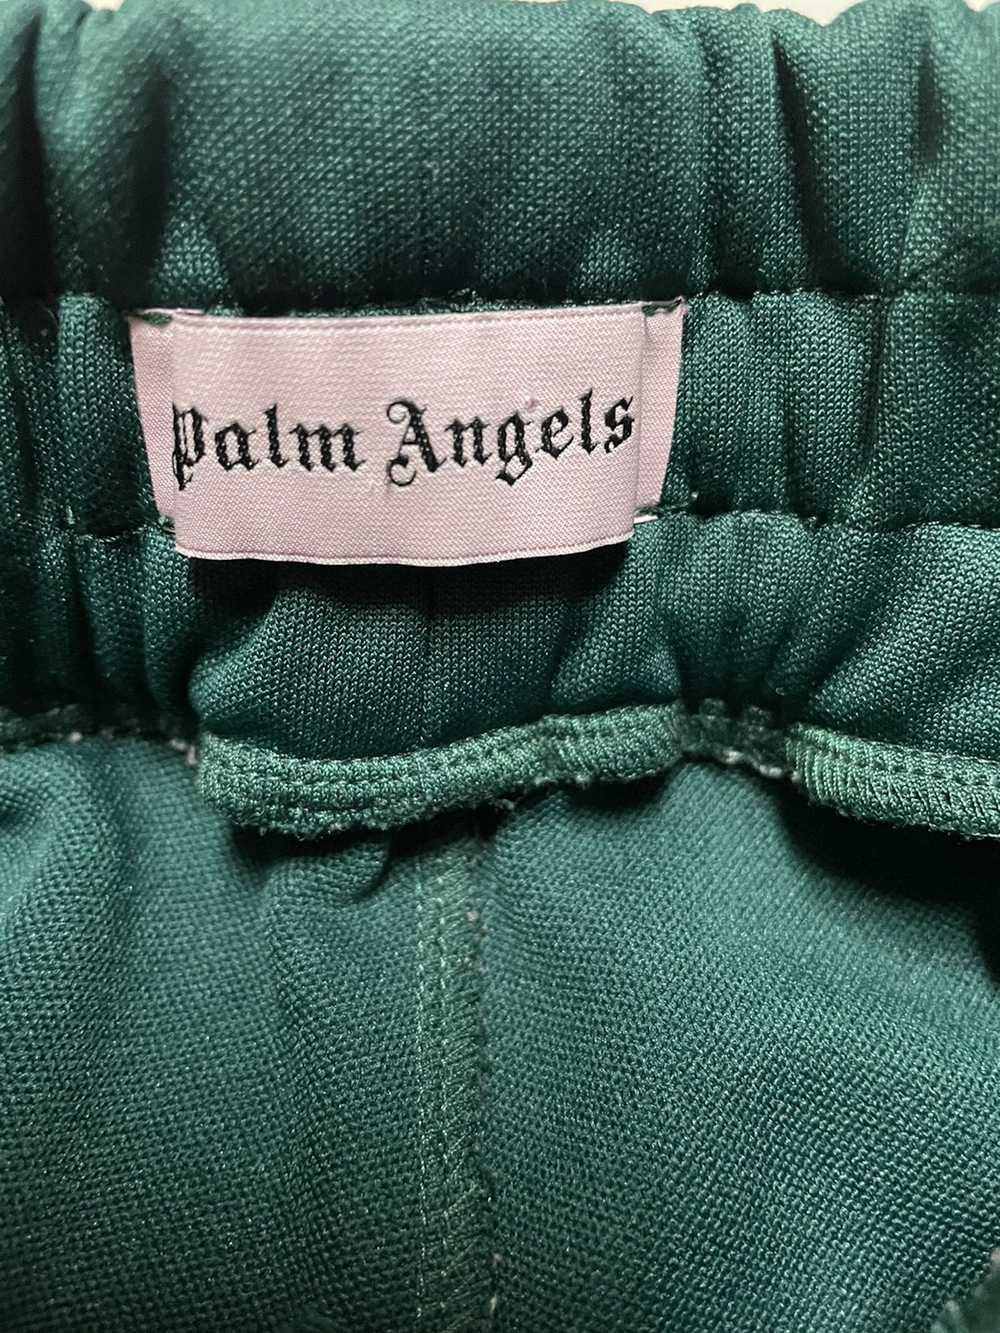 Palm Angels Palm Angels Track pants (SMALL) - image 5